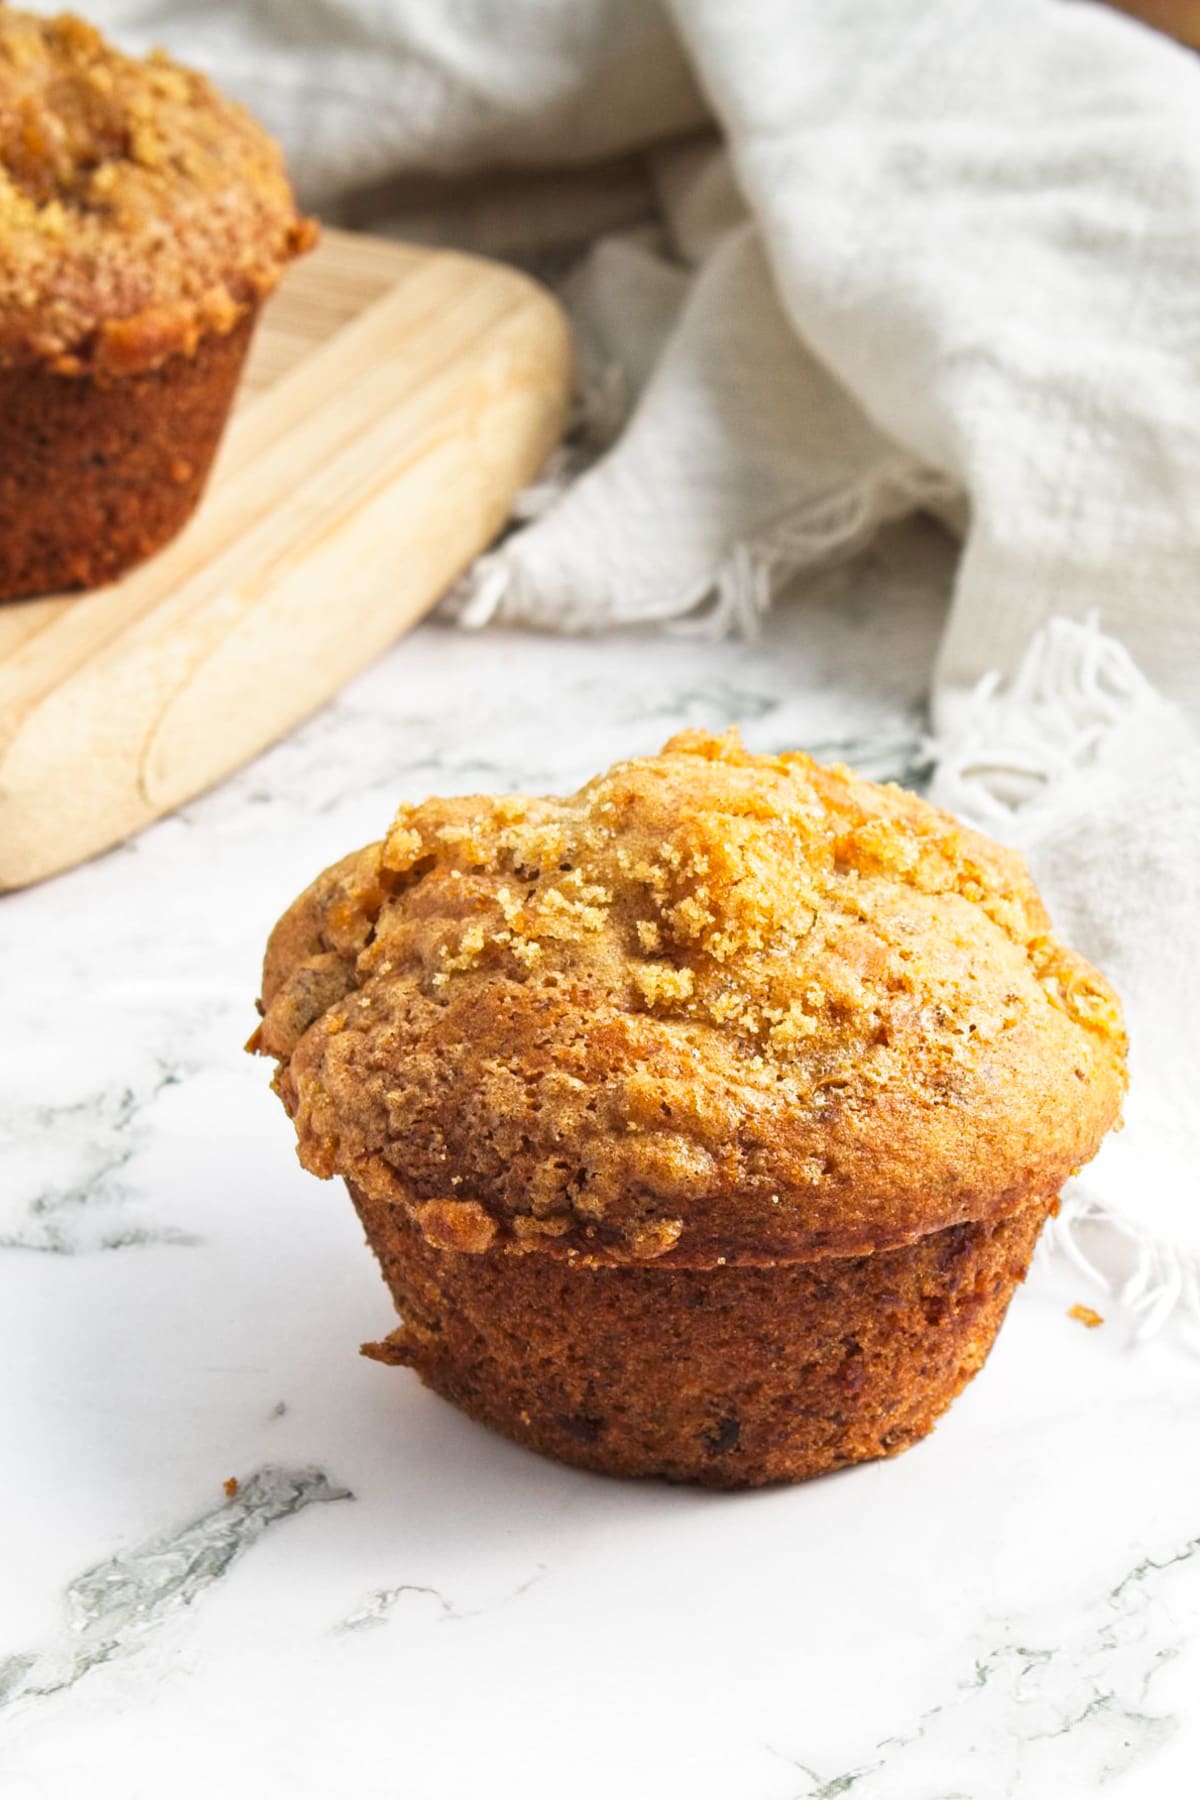 A fluffy and golden peach muffin on a marble worktop.